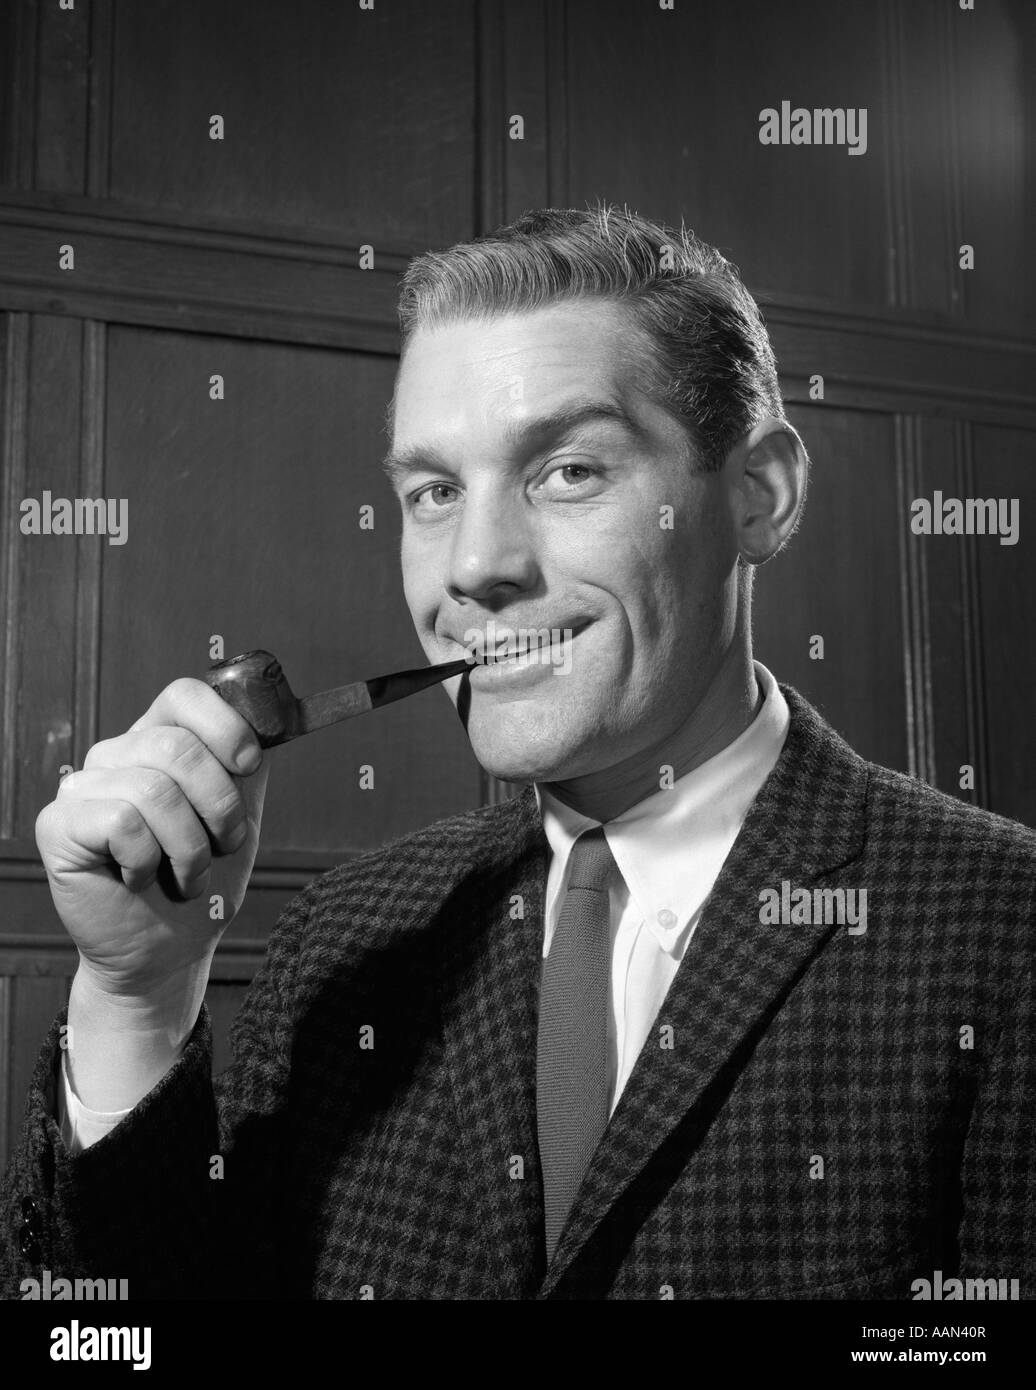 1960s 1950s PORTRAIT OF MAN IN TWEED JACKET SMOKING PIPE SMILING LOOKING AT CAMERA Stock Photo